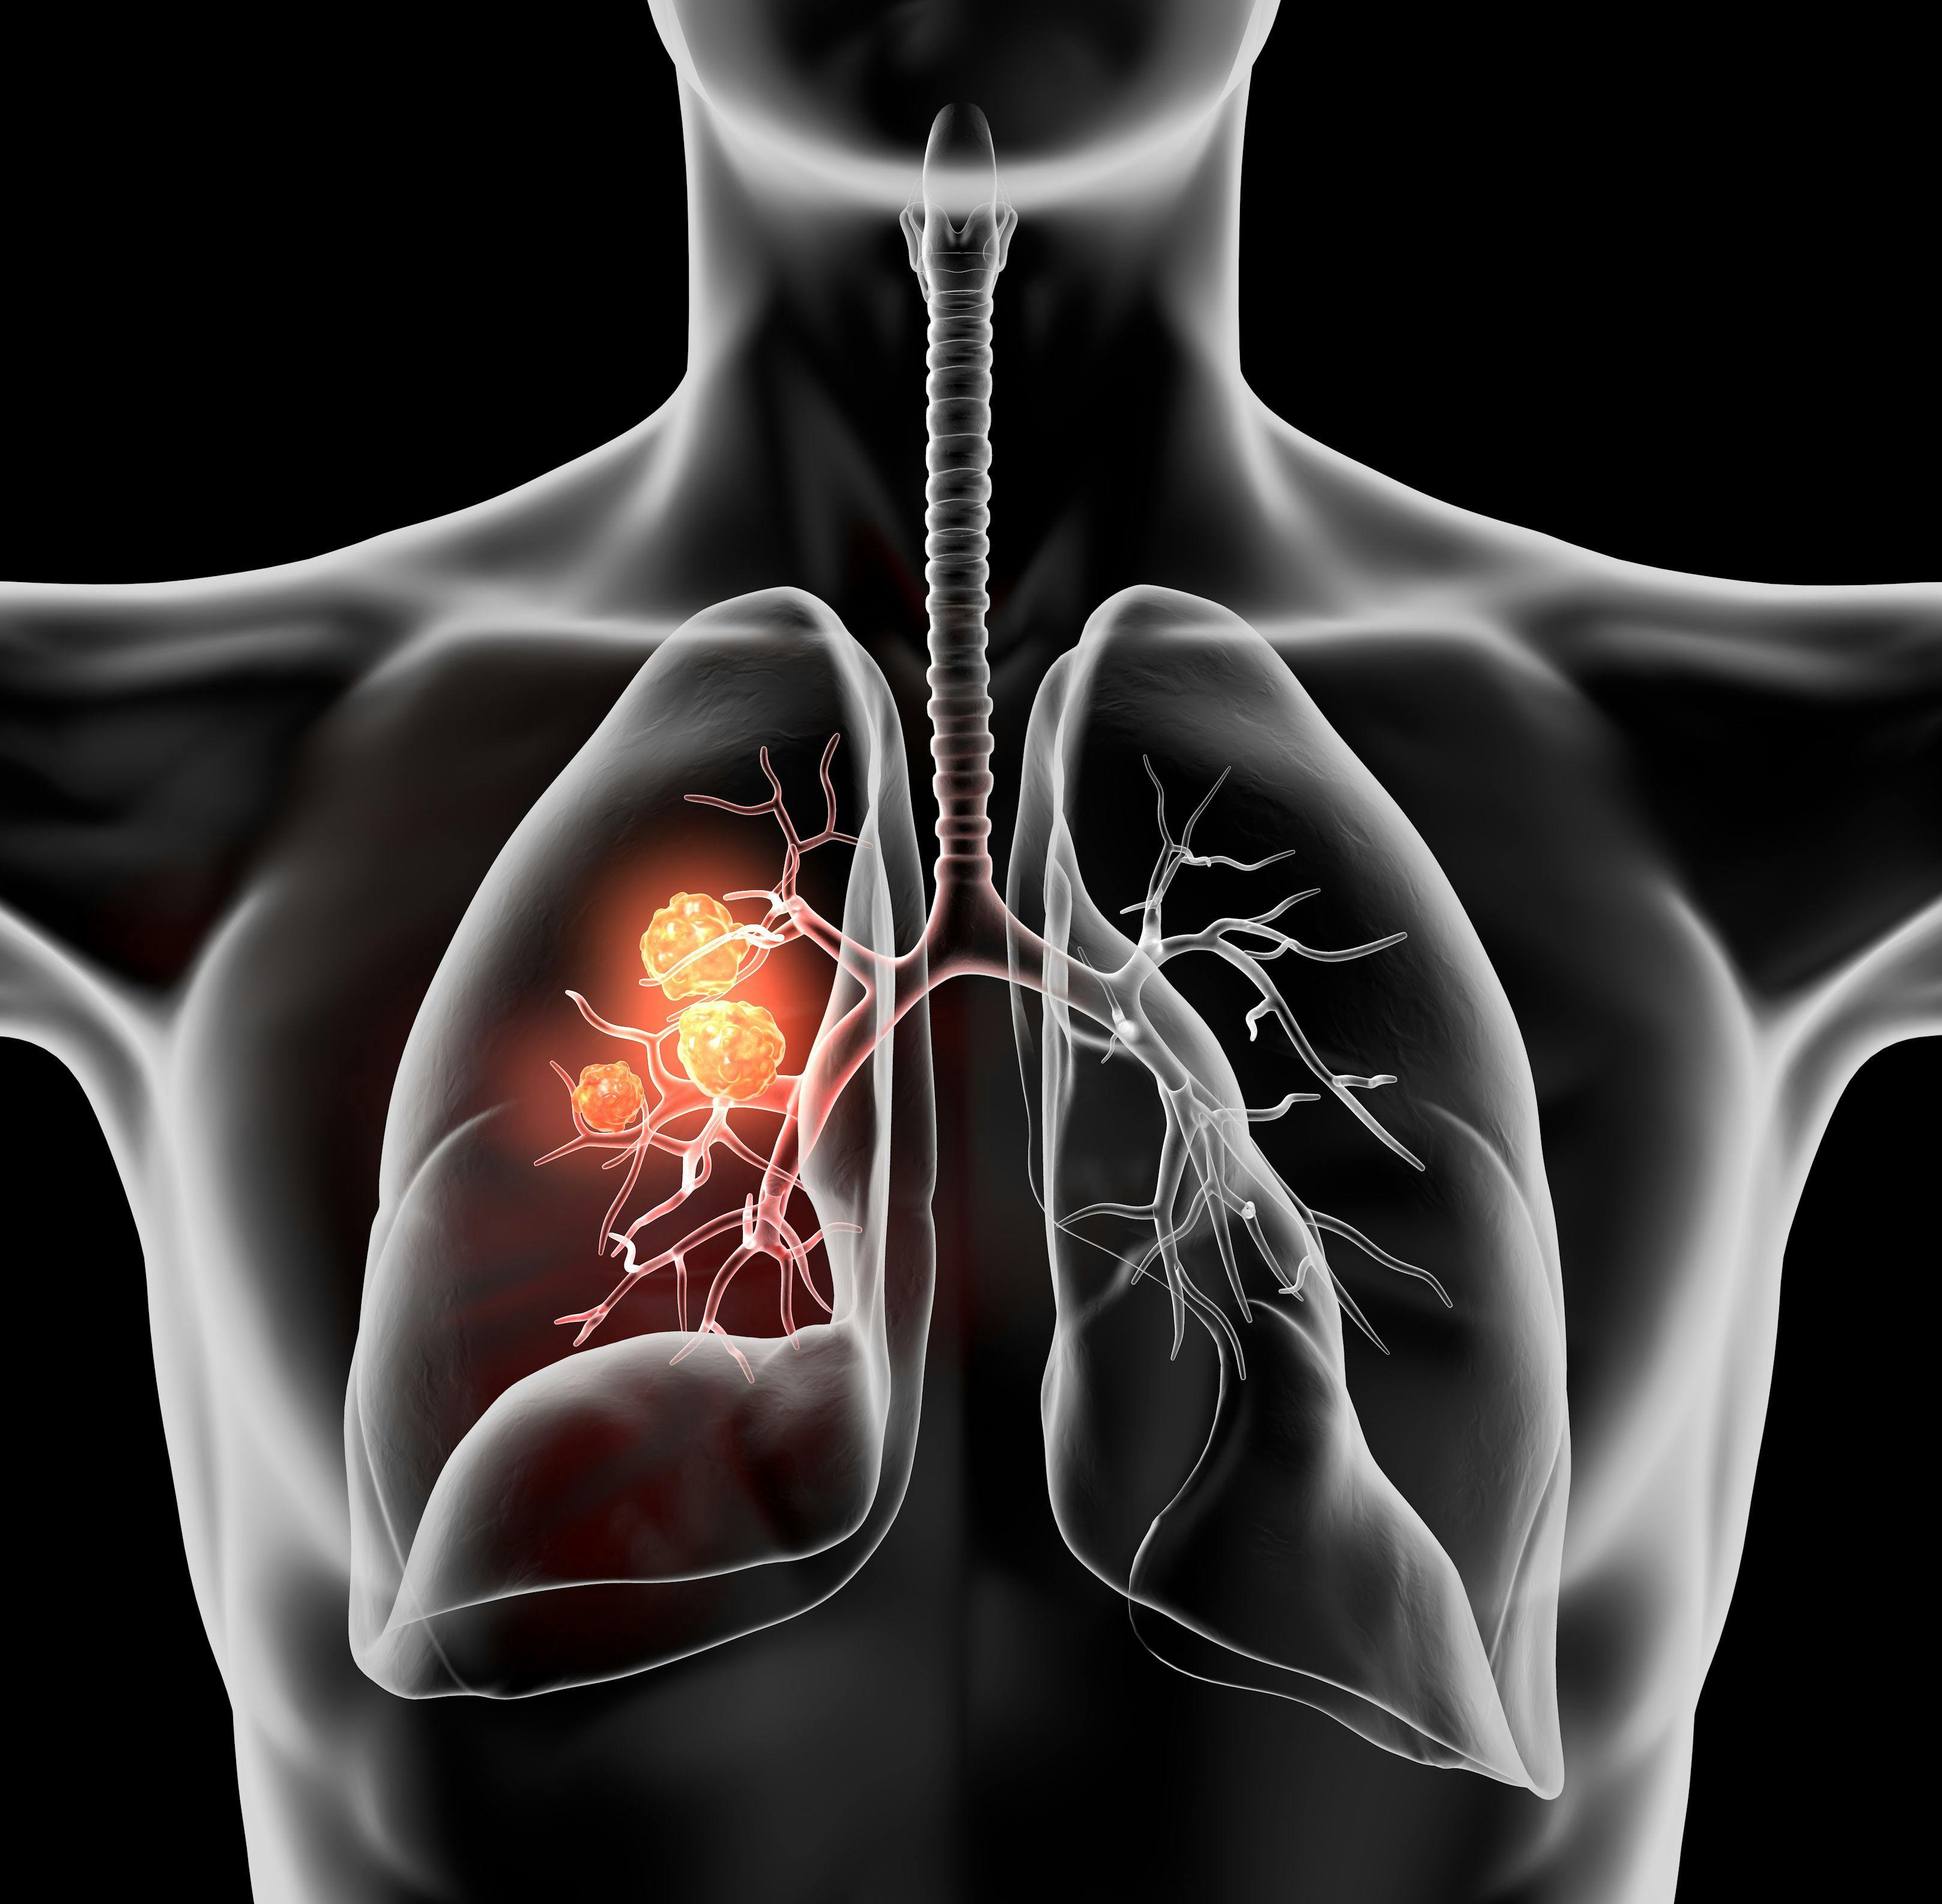 Neoadjuvant nivolumab combination followed by surgery and adjuvant nivolumab show an improvement in event-free survival for patients with previously untreated resectable stage II to IIIB non-small cell lung cancer.